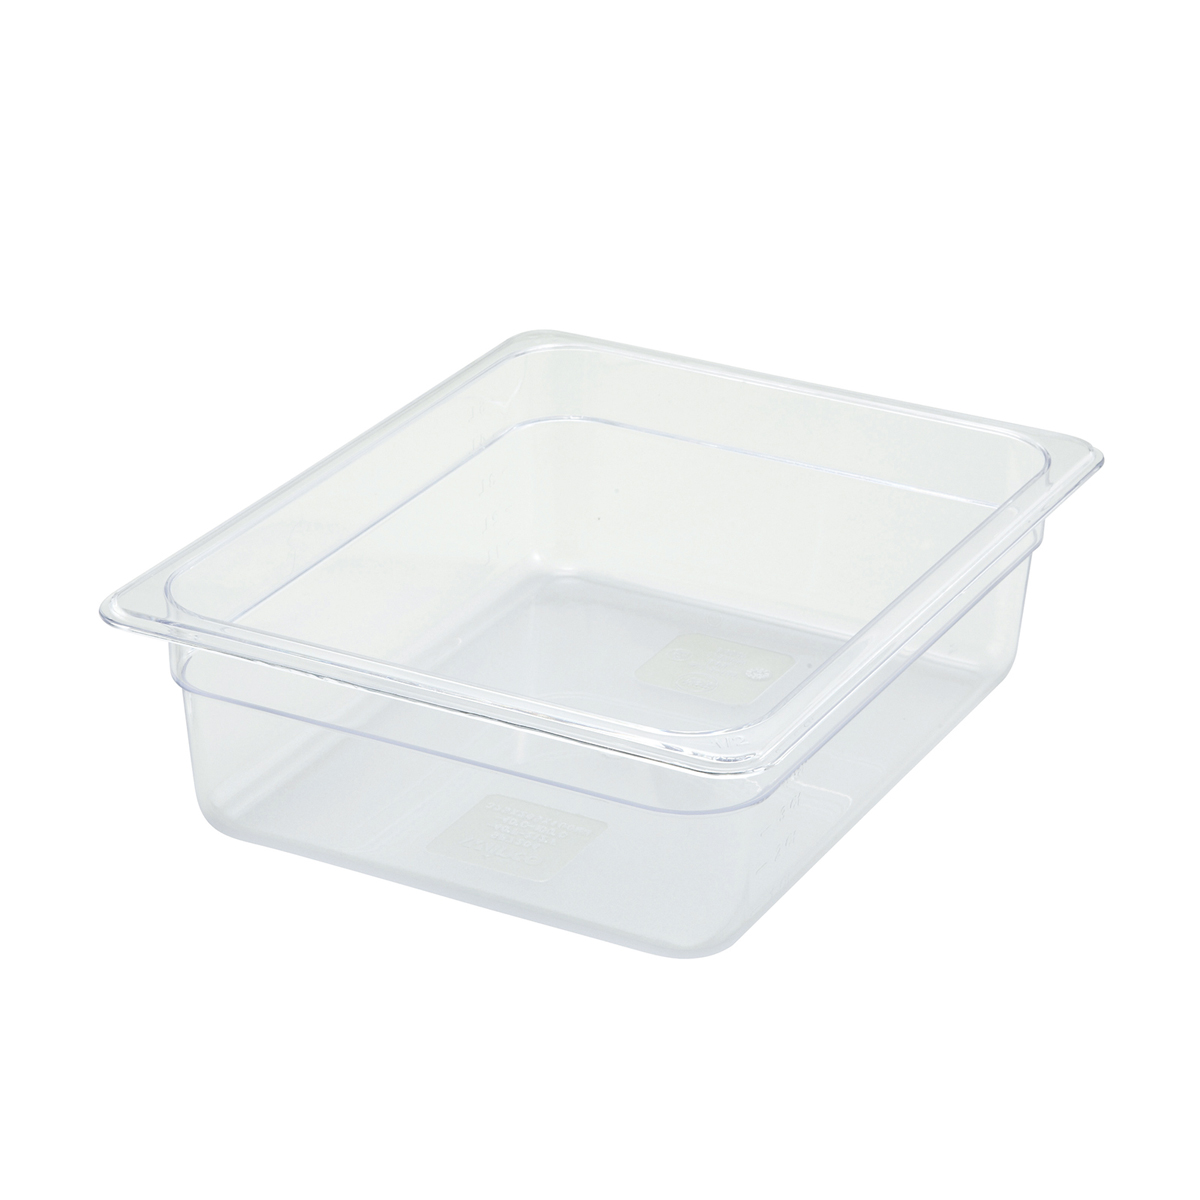 Winco SP7204 Poly-Ware Polycarbonate Half Size Food Pan 3-1/2" High